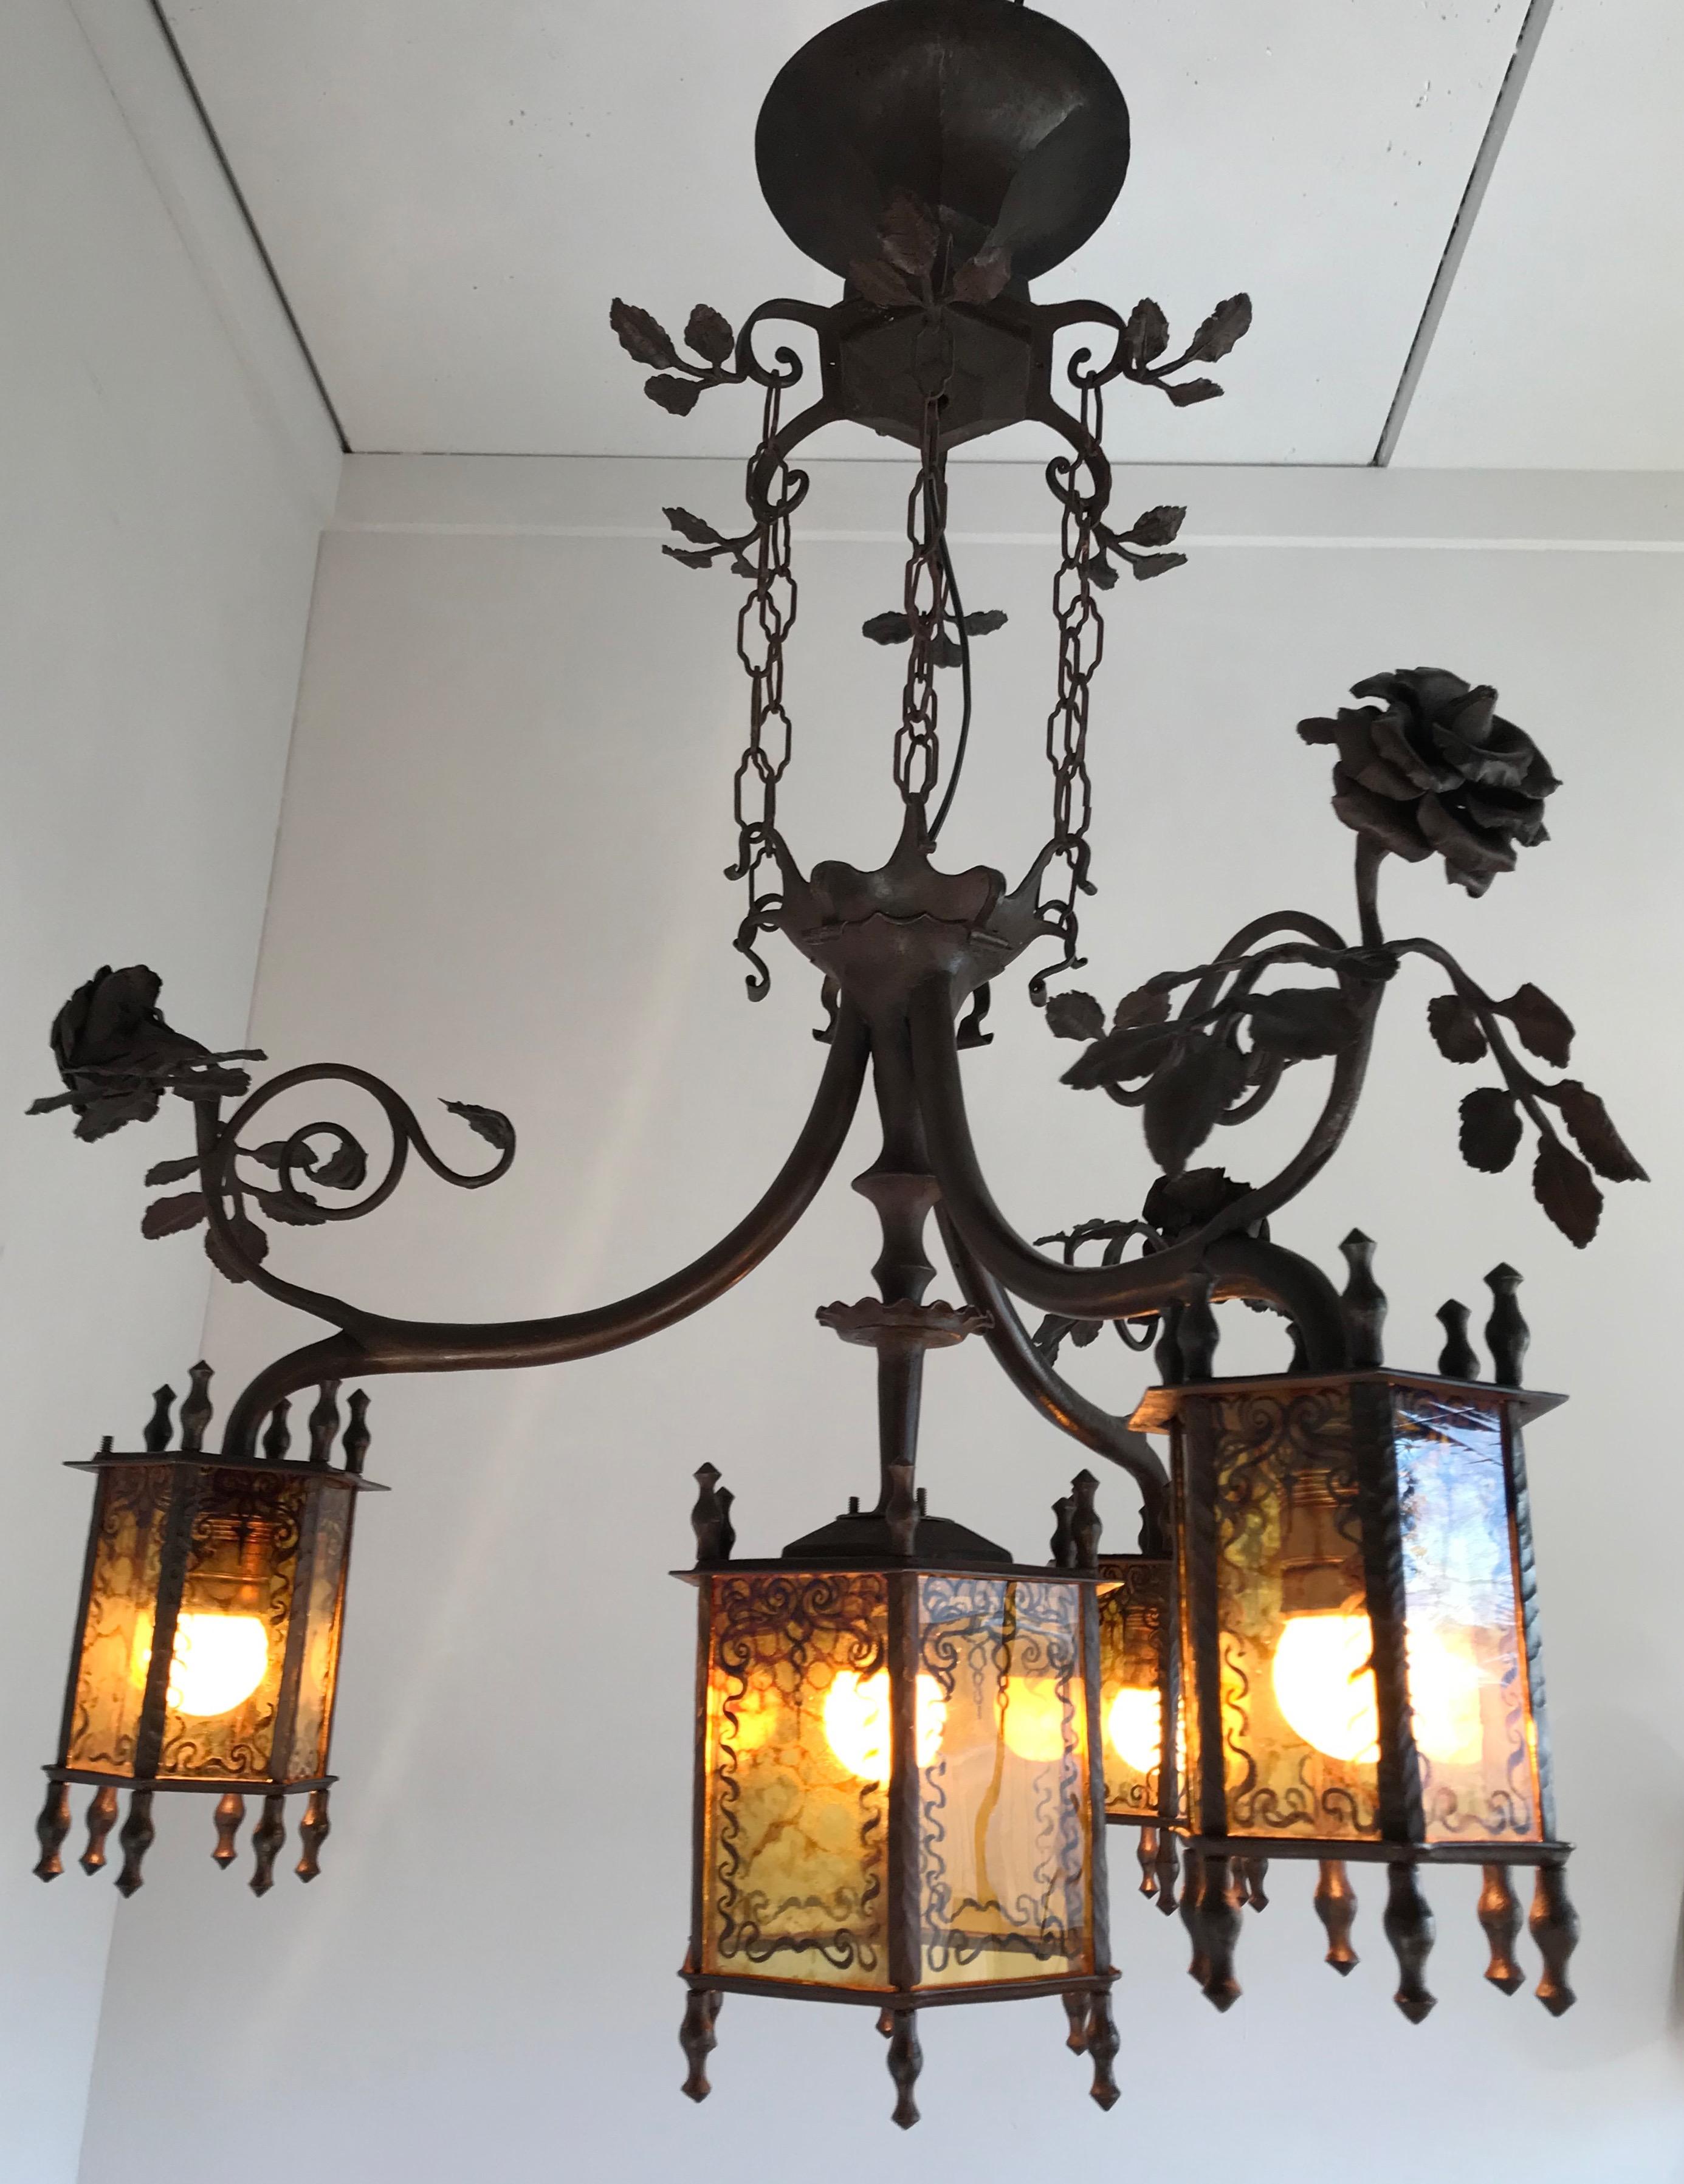 Amazing and all handcrafted Arts & Crafts chandelier.

This early 20th century work of lighting art is the only one of its kind and it is in very good condition. If you are a collector of top-quality, early 1900s workmanship then this forged in fire